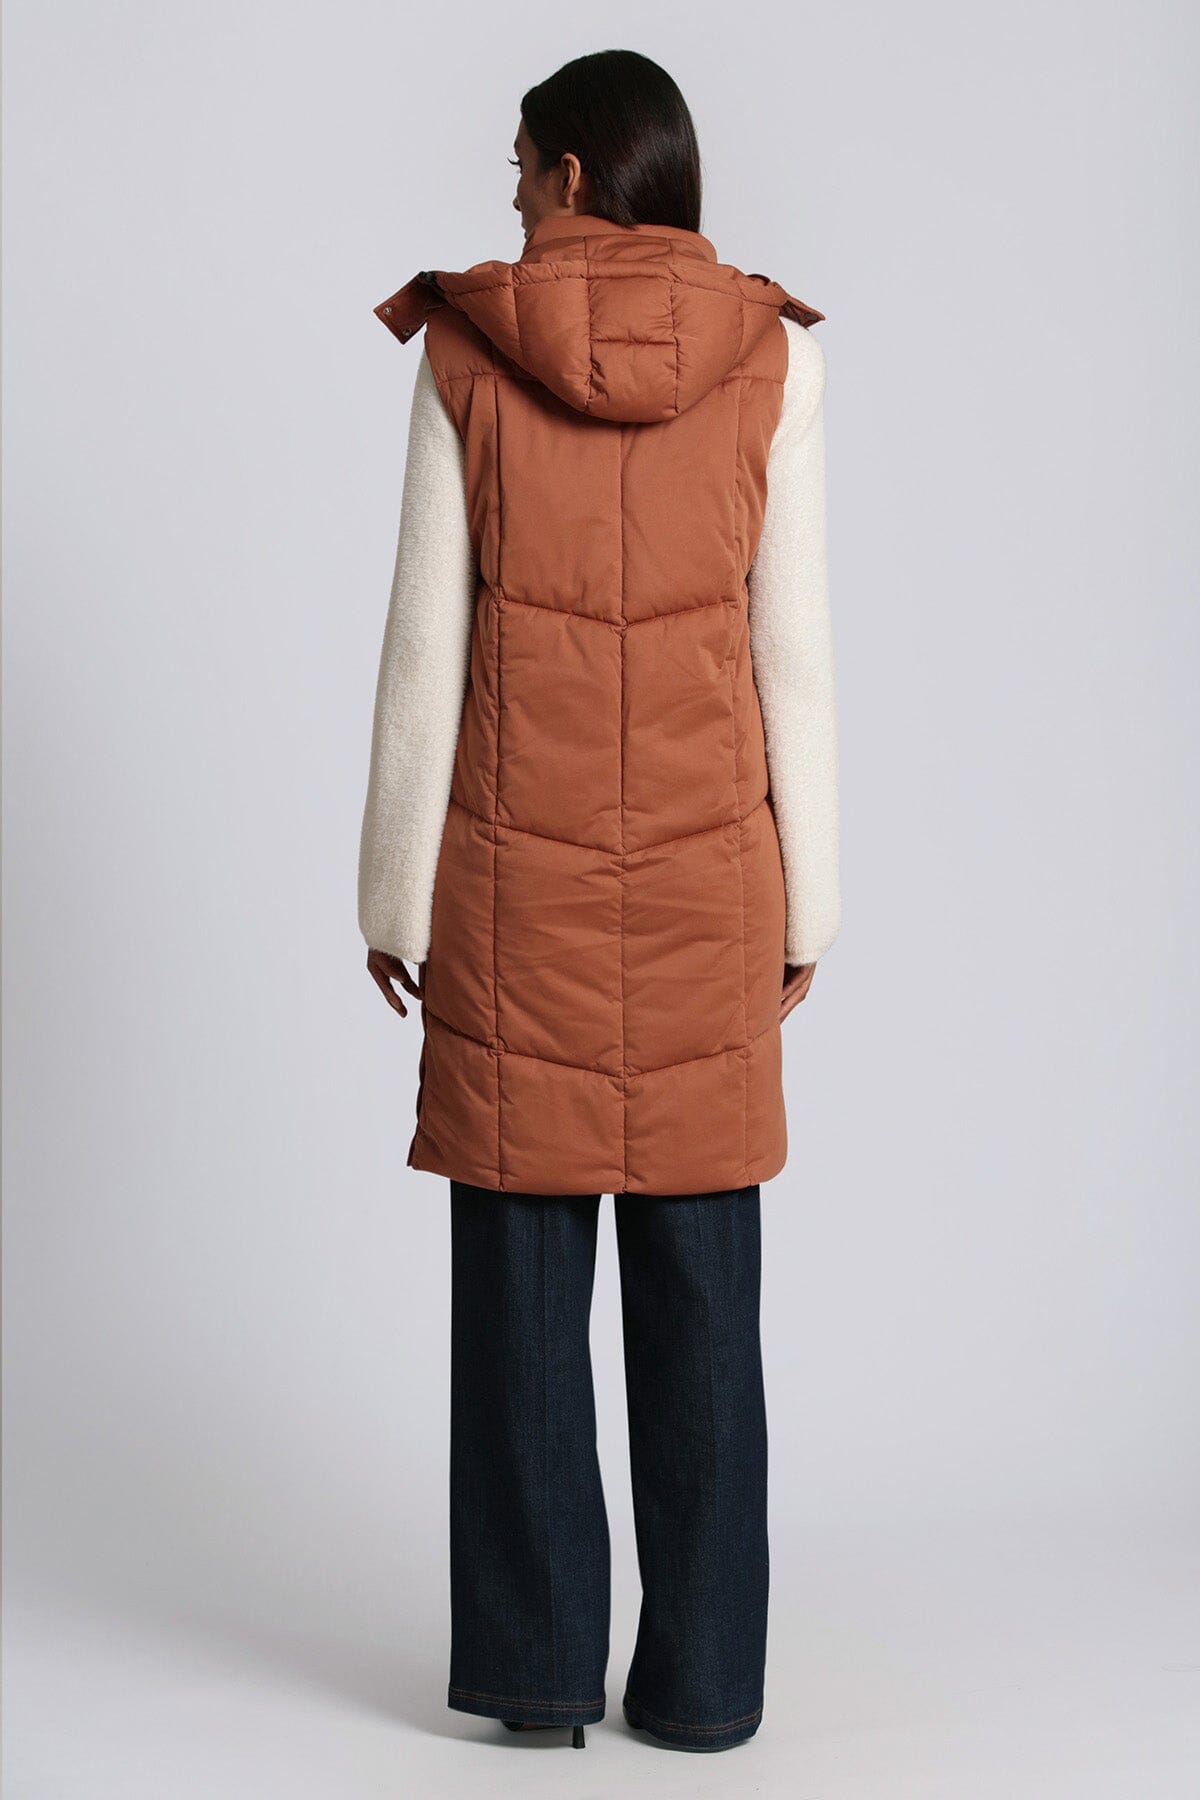 thermal puff hooded longline puffer vest cedar brown - figure flattering designer fashion day to night vests for women